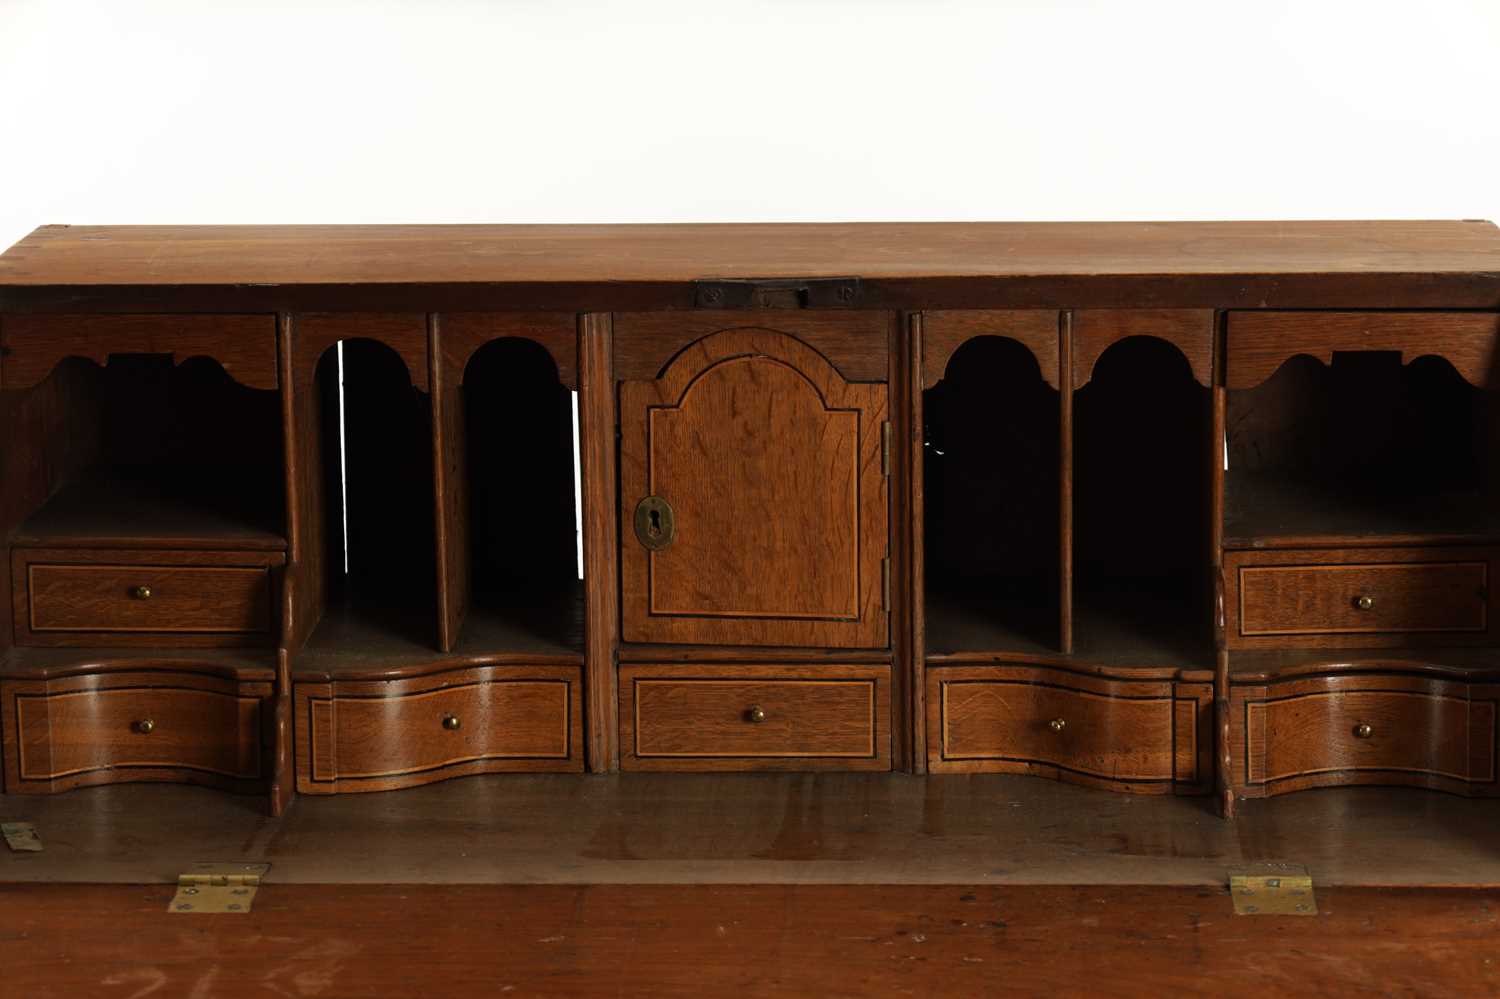 AN EARLY 18TH CENTURY COLONIAL PADOUK WOOD BUREAU - Image 6 of 9